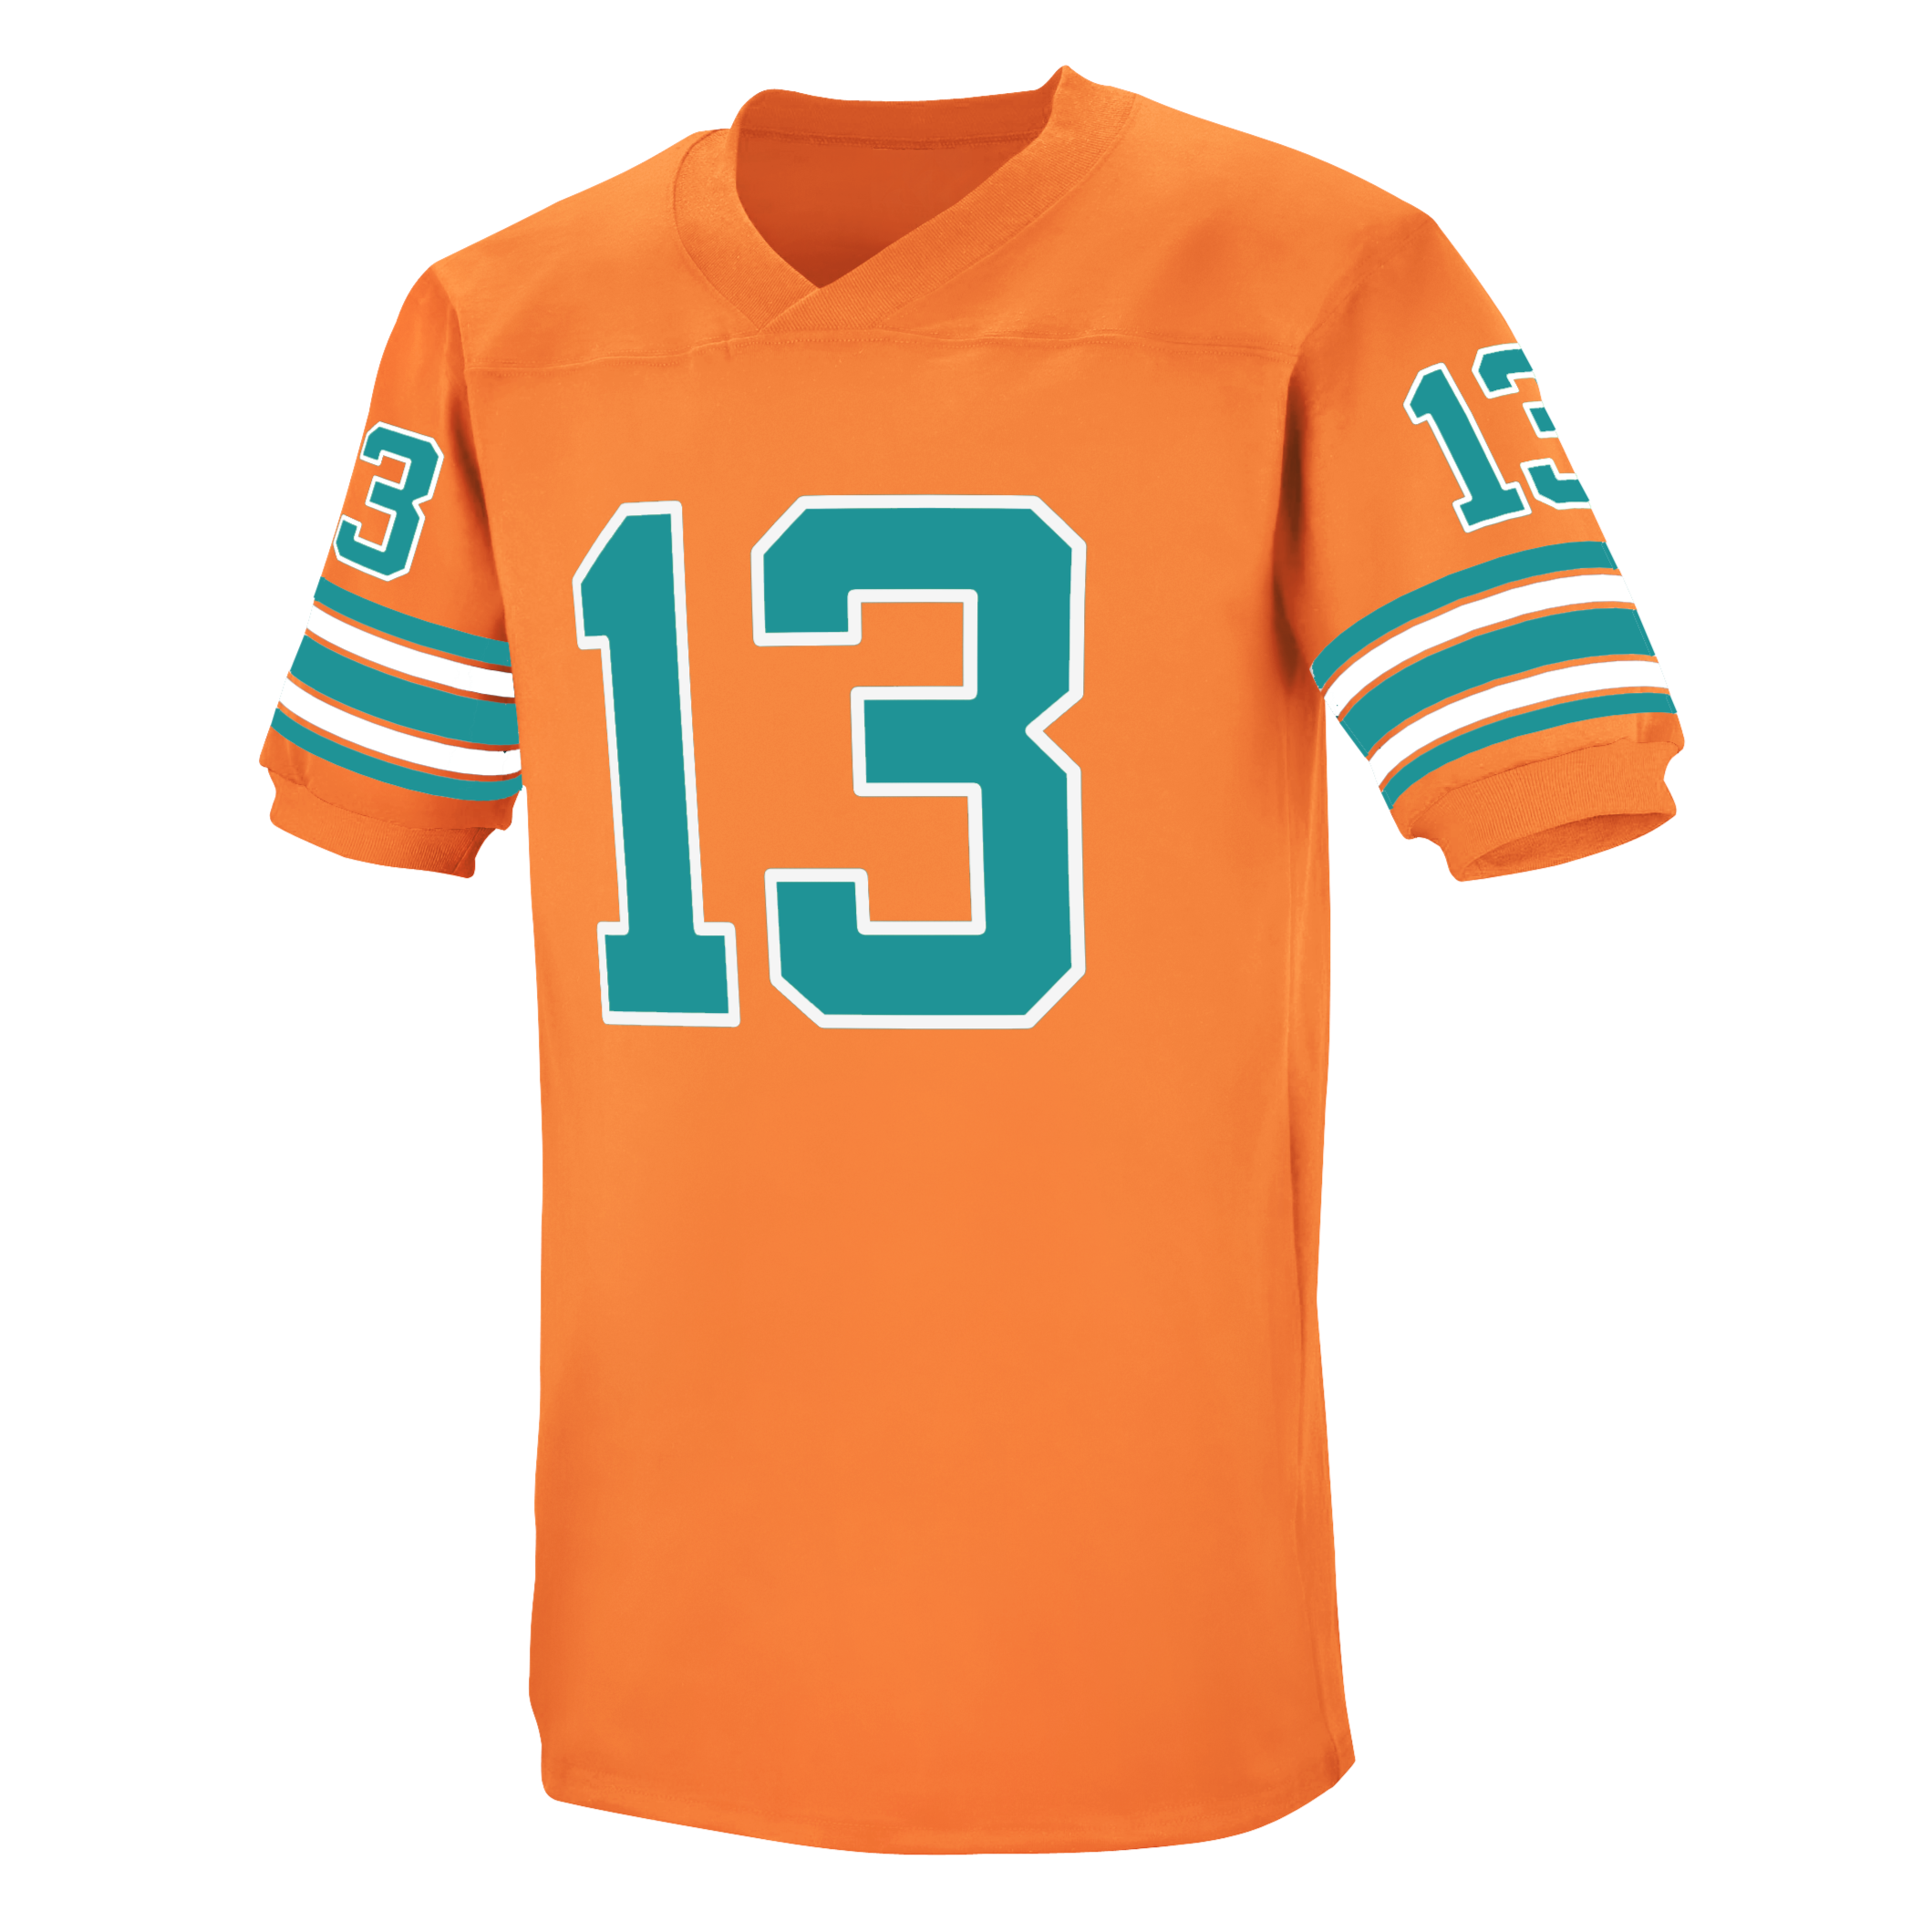 Undefeated Football Jersey